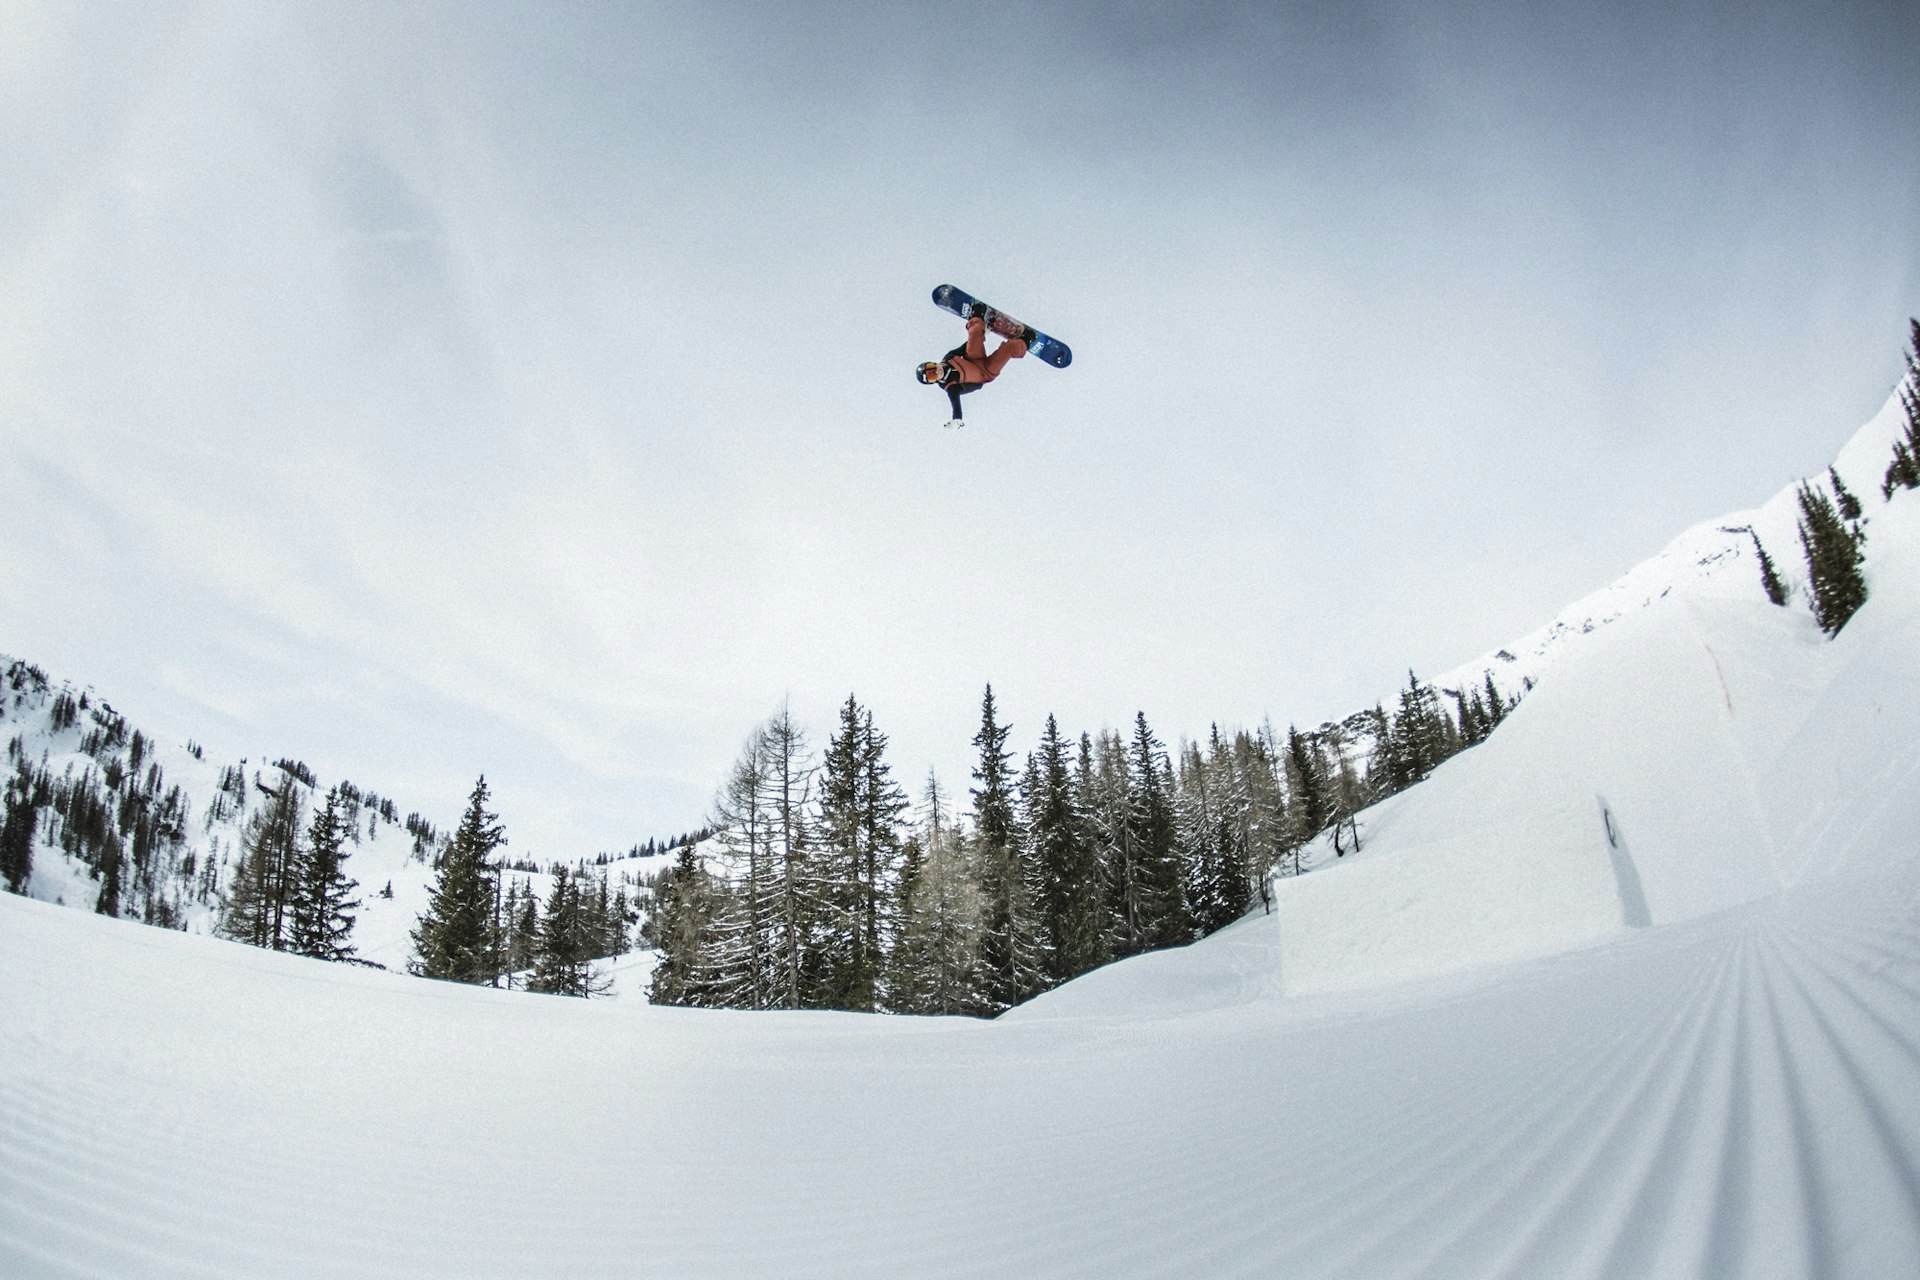 One-on-one with Aimee Fuller: Olympic snowboarder, supreme shredder